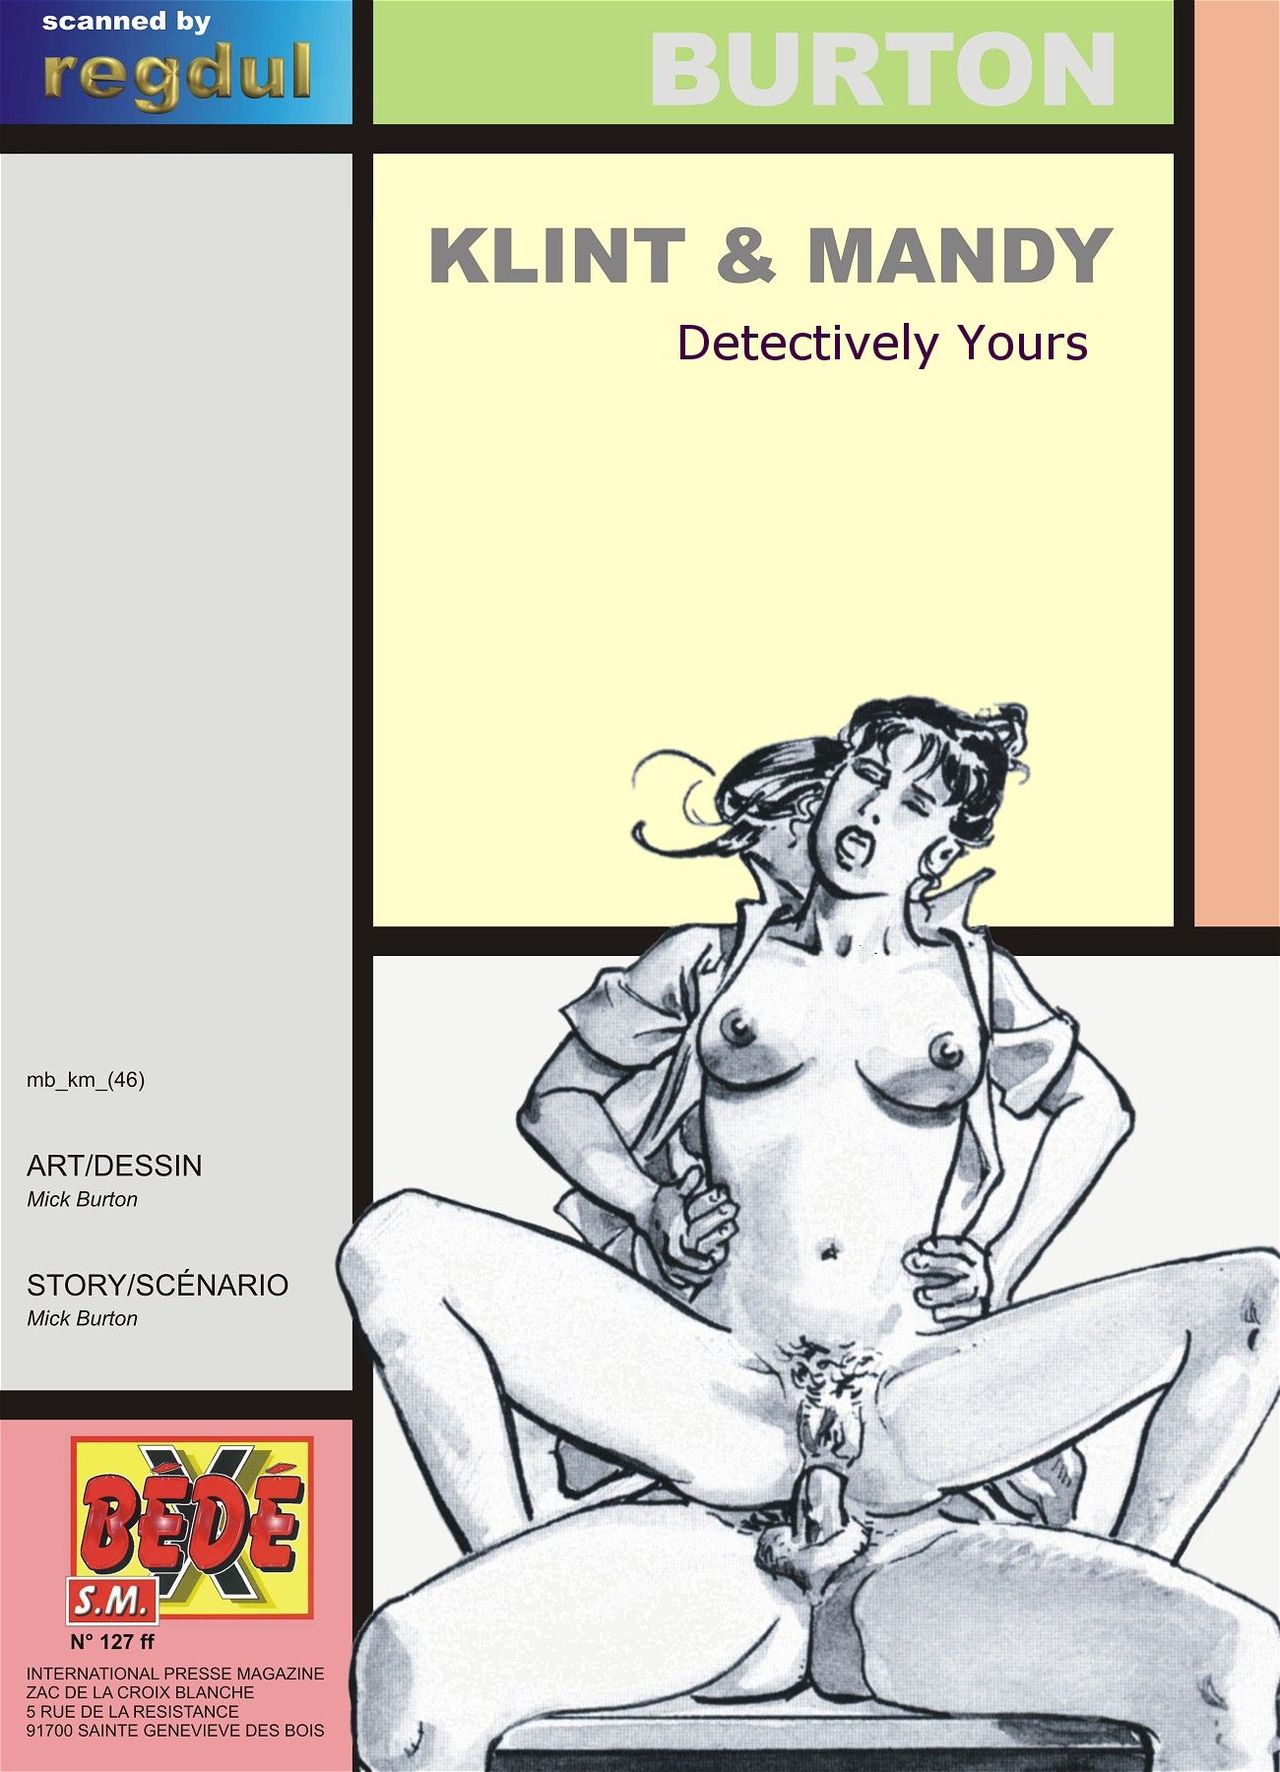 [Mick Burton] Klint and Mandy - Detectively Yours [English] {Donnie B.} 